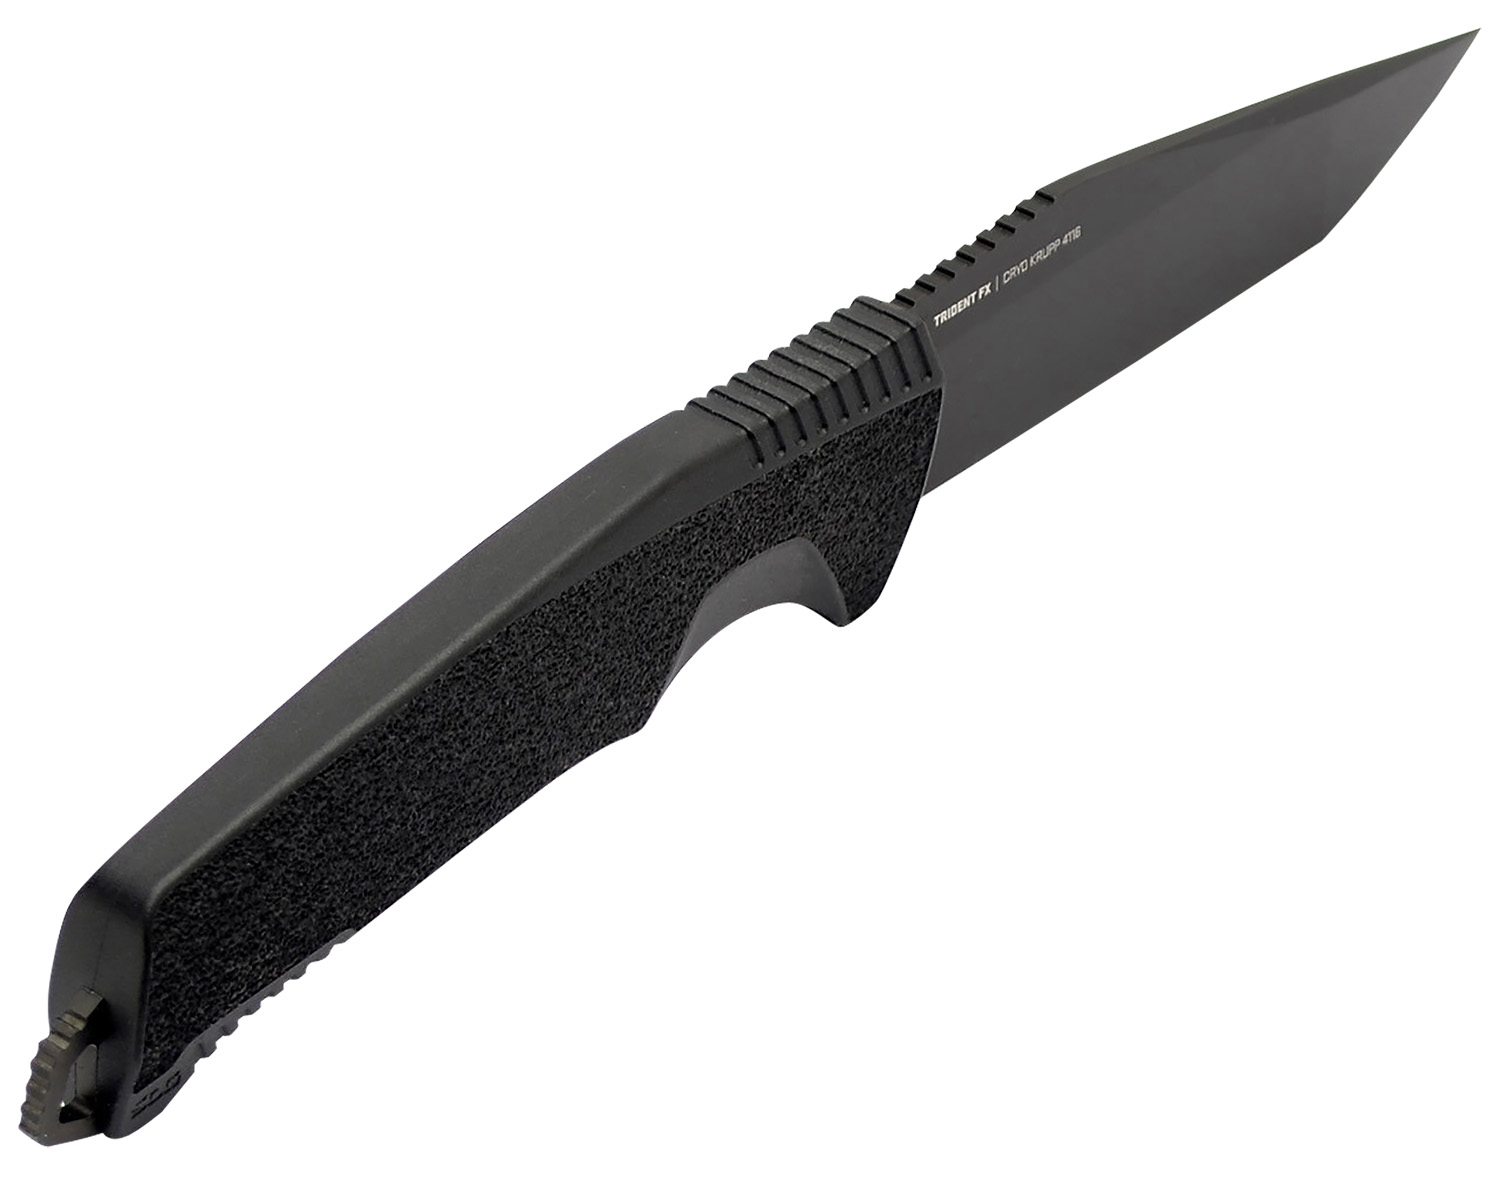 S.O.G SOG17120157 Trident FX 4.20" Fixed Tanto Plain TiNi 4116 SS Blade/Black Textured Grn Handle